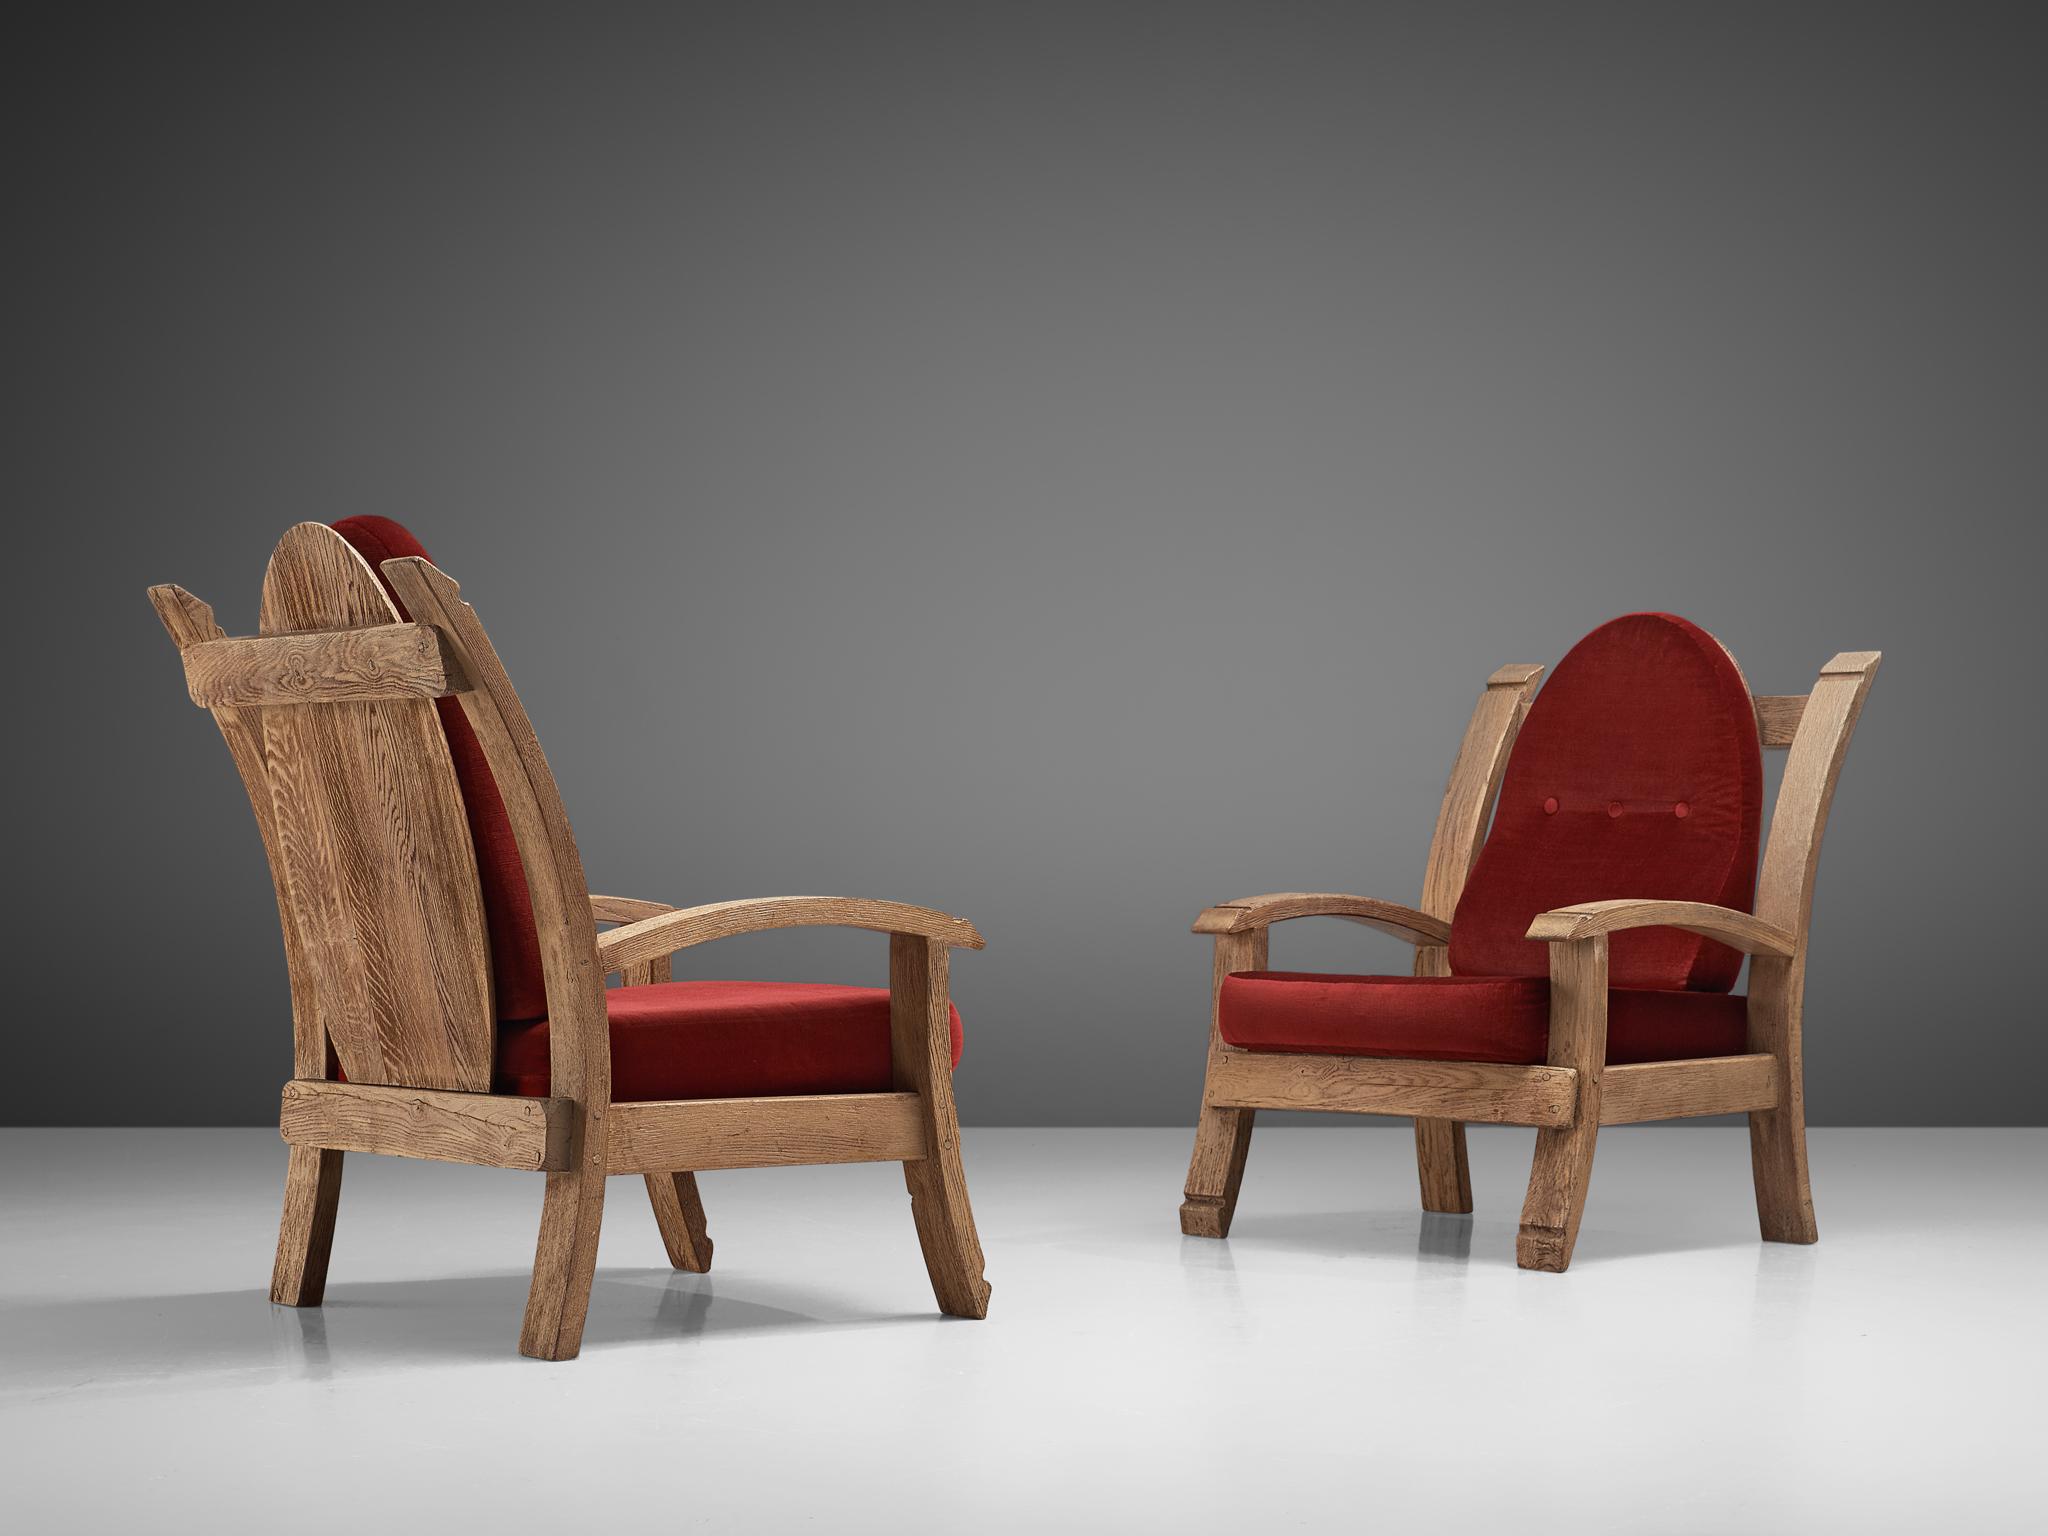 Pair of lounge chairs, oak and fabric, France, 1940s

Charming French Art Deco armchairs made of oak. The design features bulky forms with elements of a throne, such as the high, almost majestic backrests that slightly leans backwards. The arms